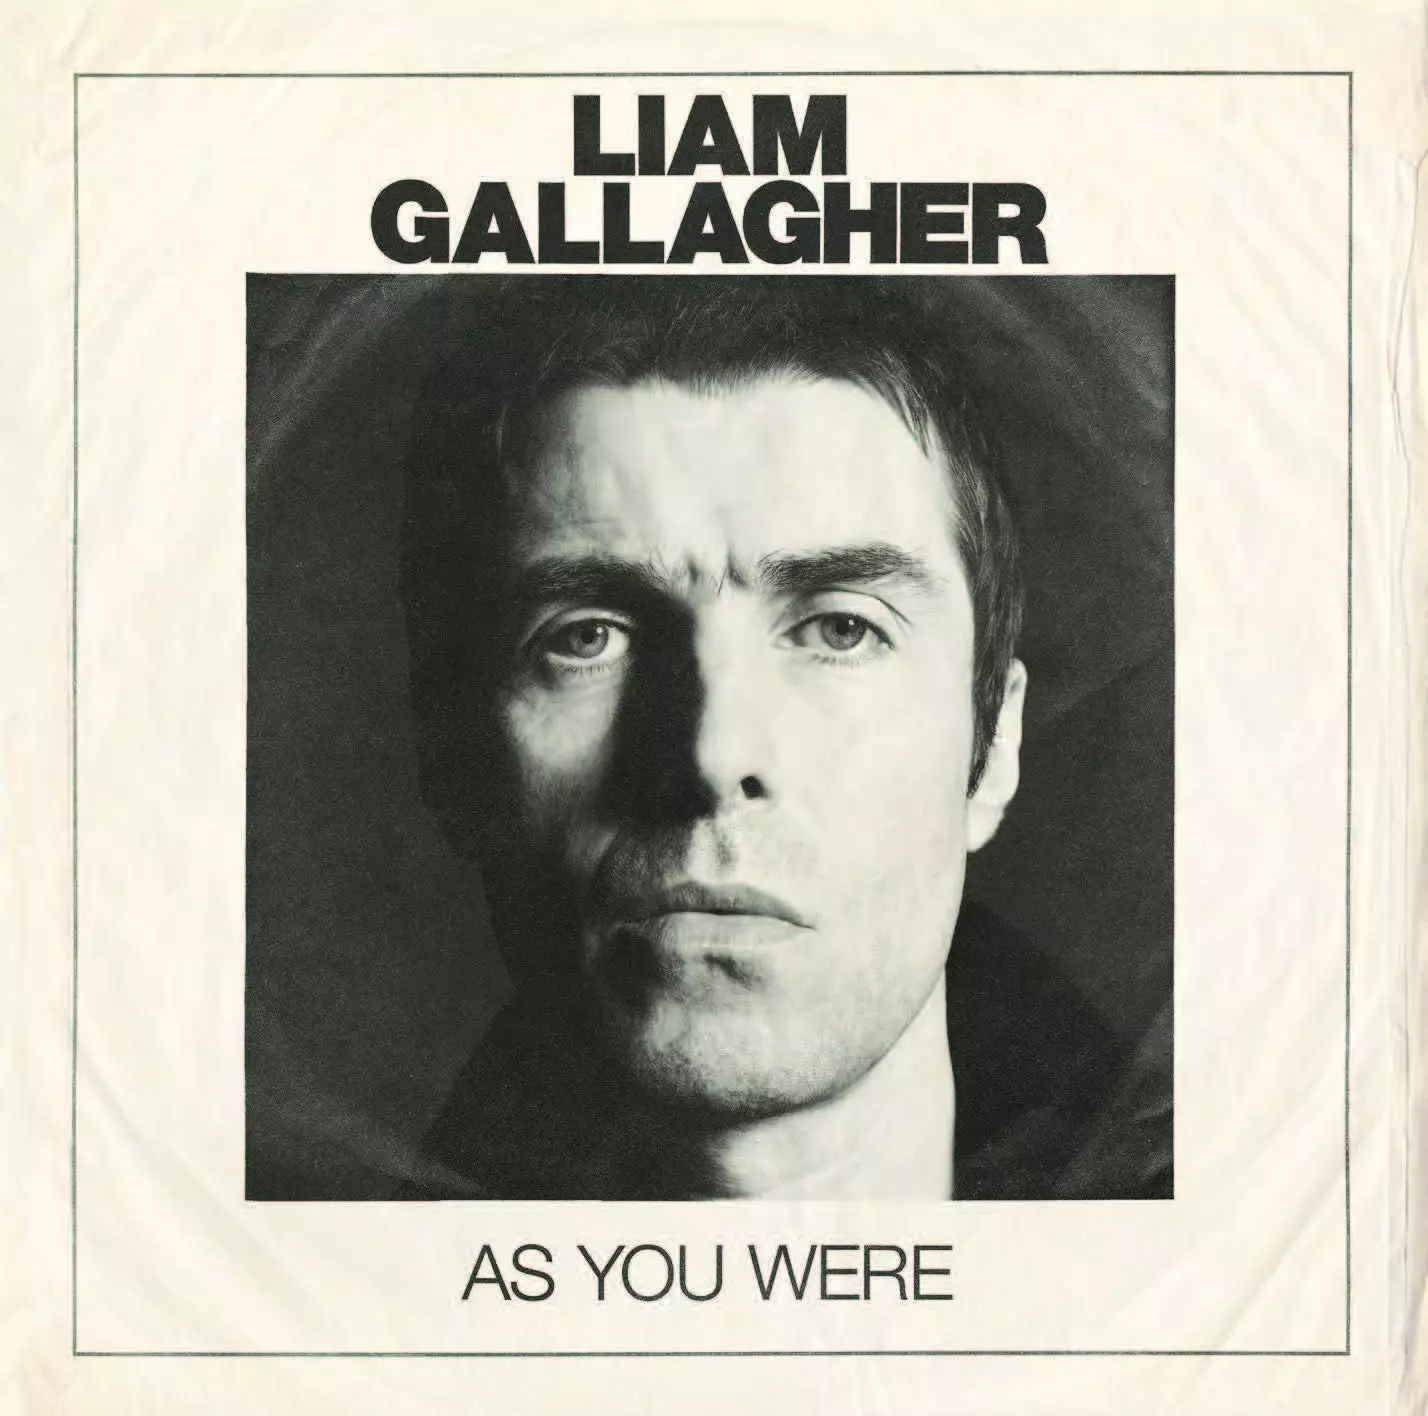 Liam Gallagher's New Album 'As You Were'.